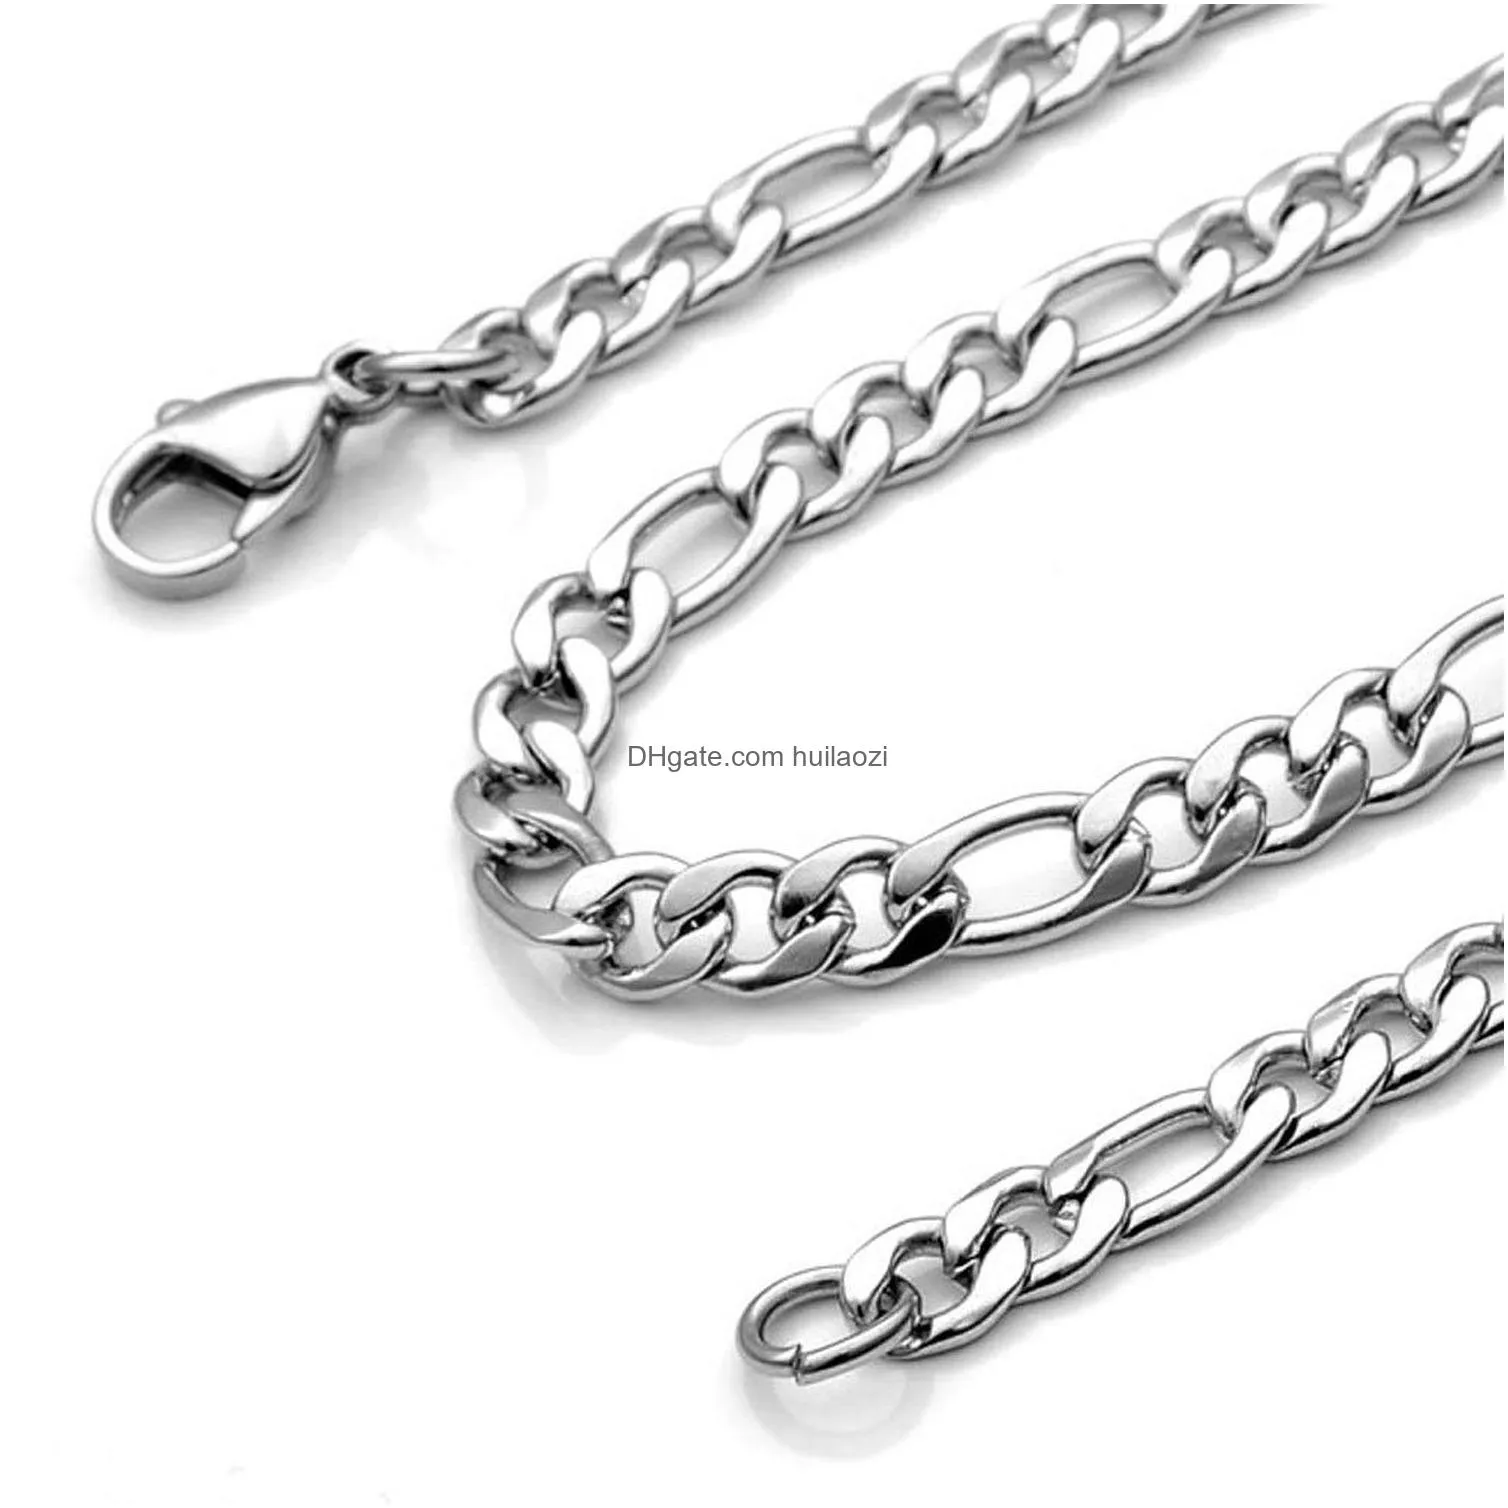 3mm/5mm/7mm/10mm stainless steel flat figaro curb cuban chain link for men women necklace 18-30 inch length with velvet bag